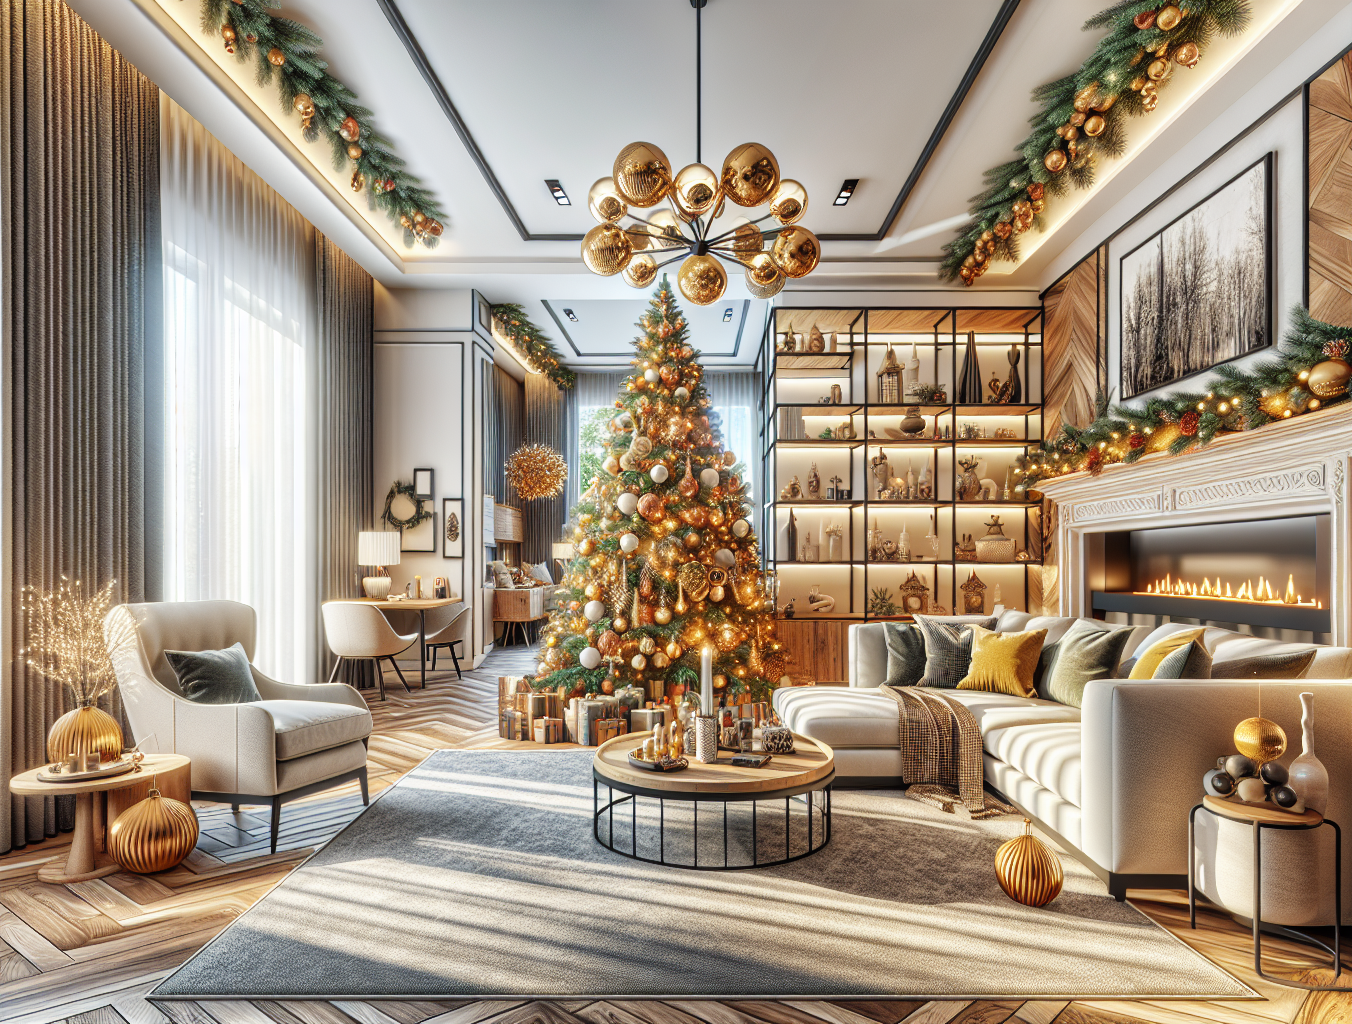 A living room design with beautiful Christmas decorations.